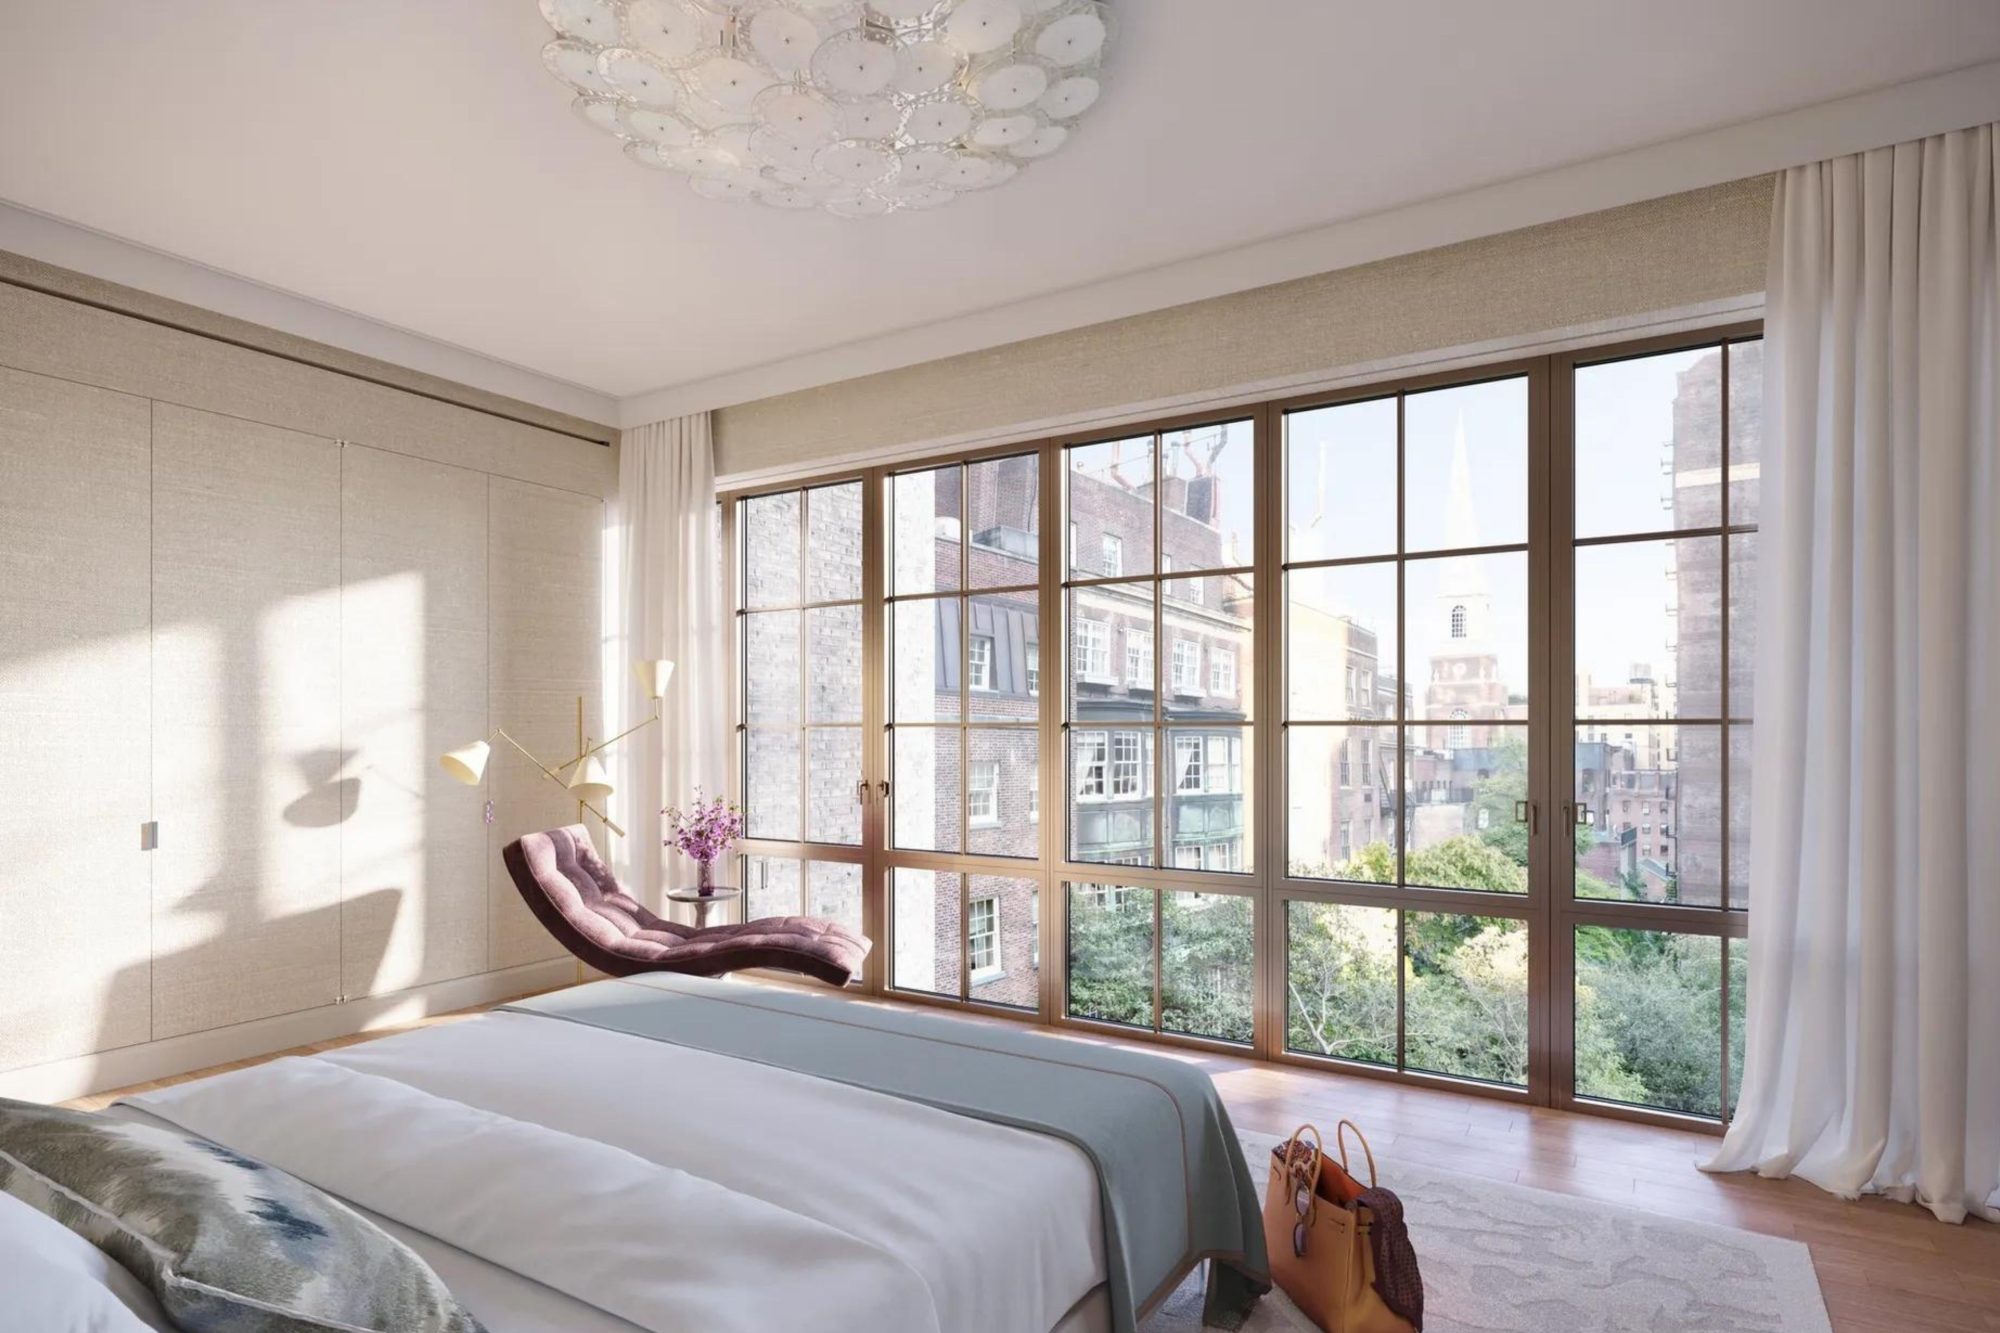 109 East 79 brings its unique elegance to the Upper East Side